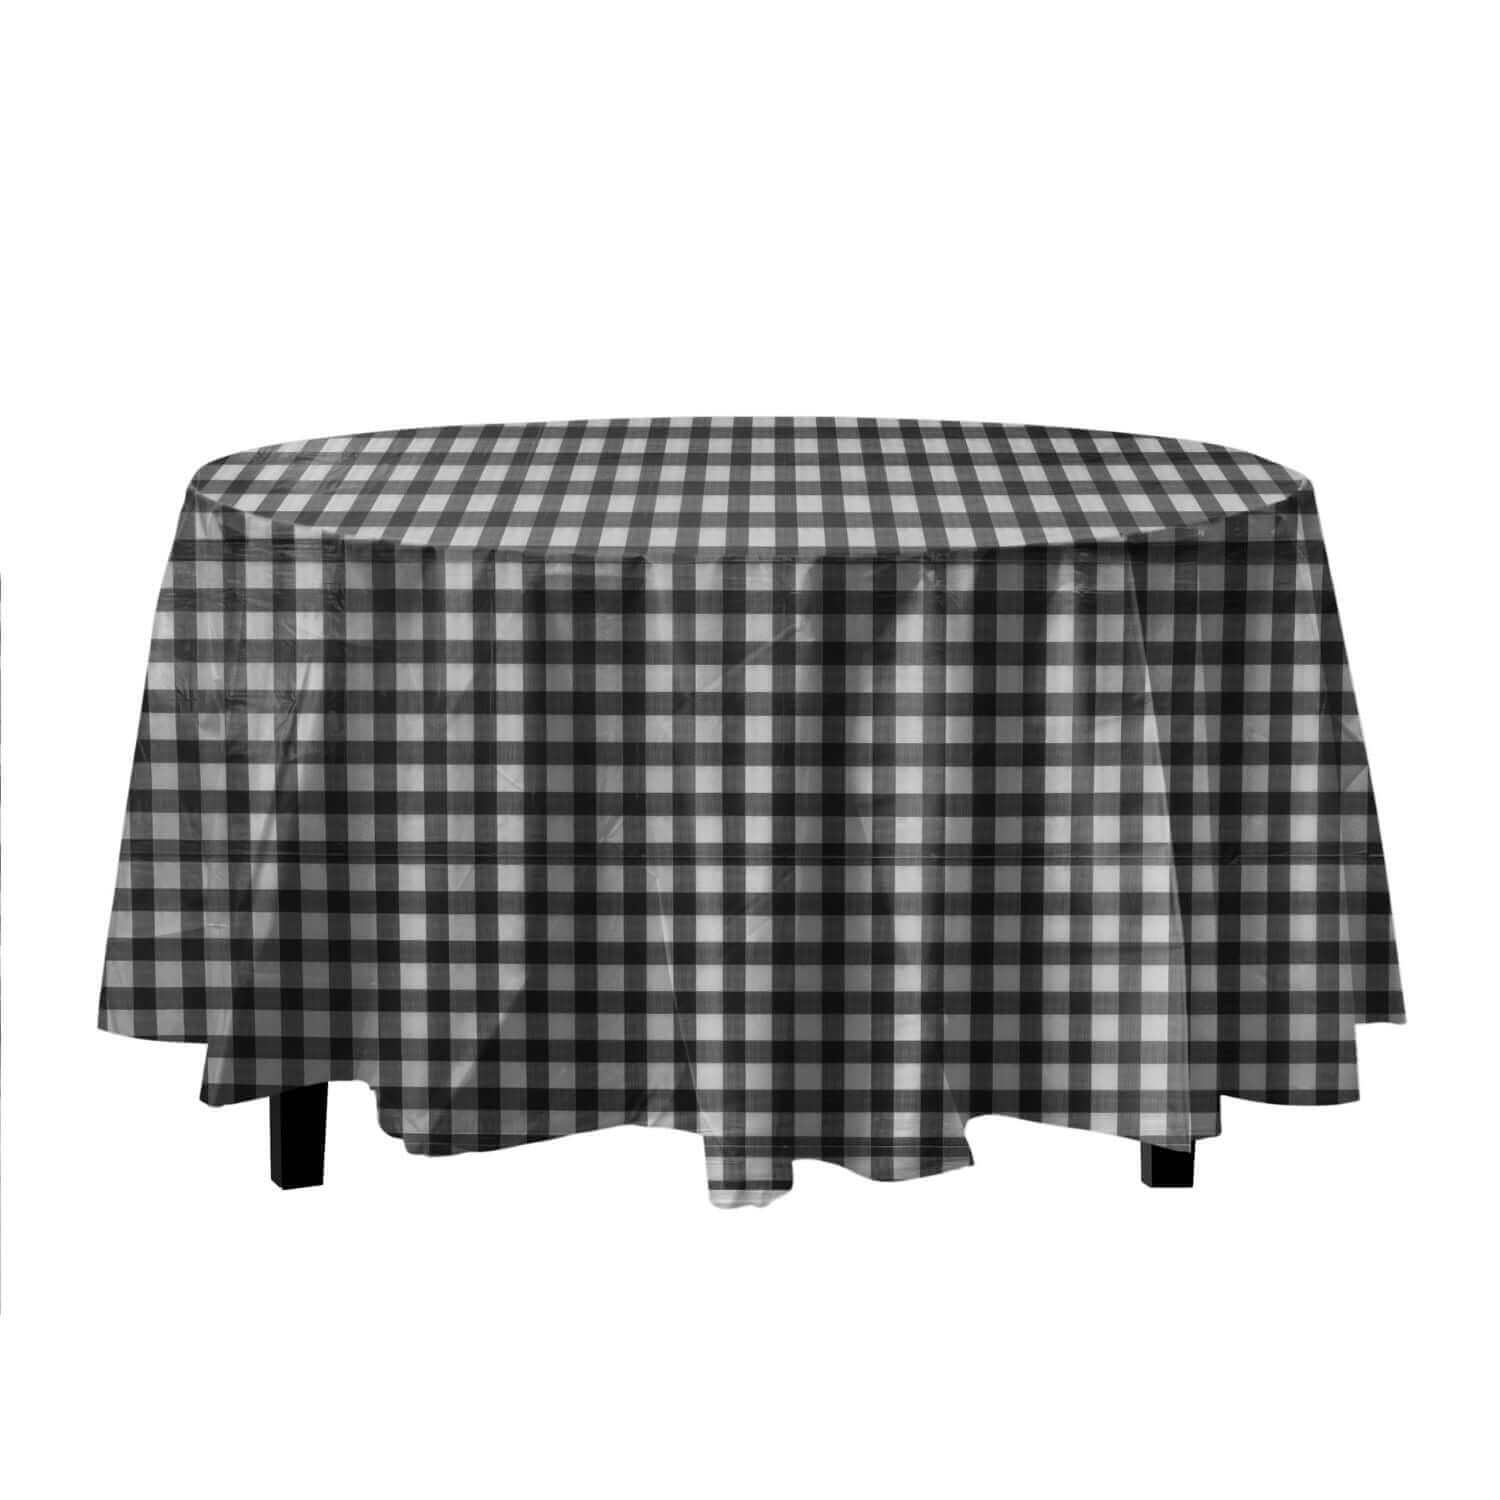 Black Gingham Printed Plastic Round Table Cloth | 48 Count